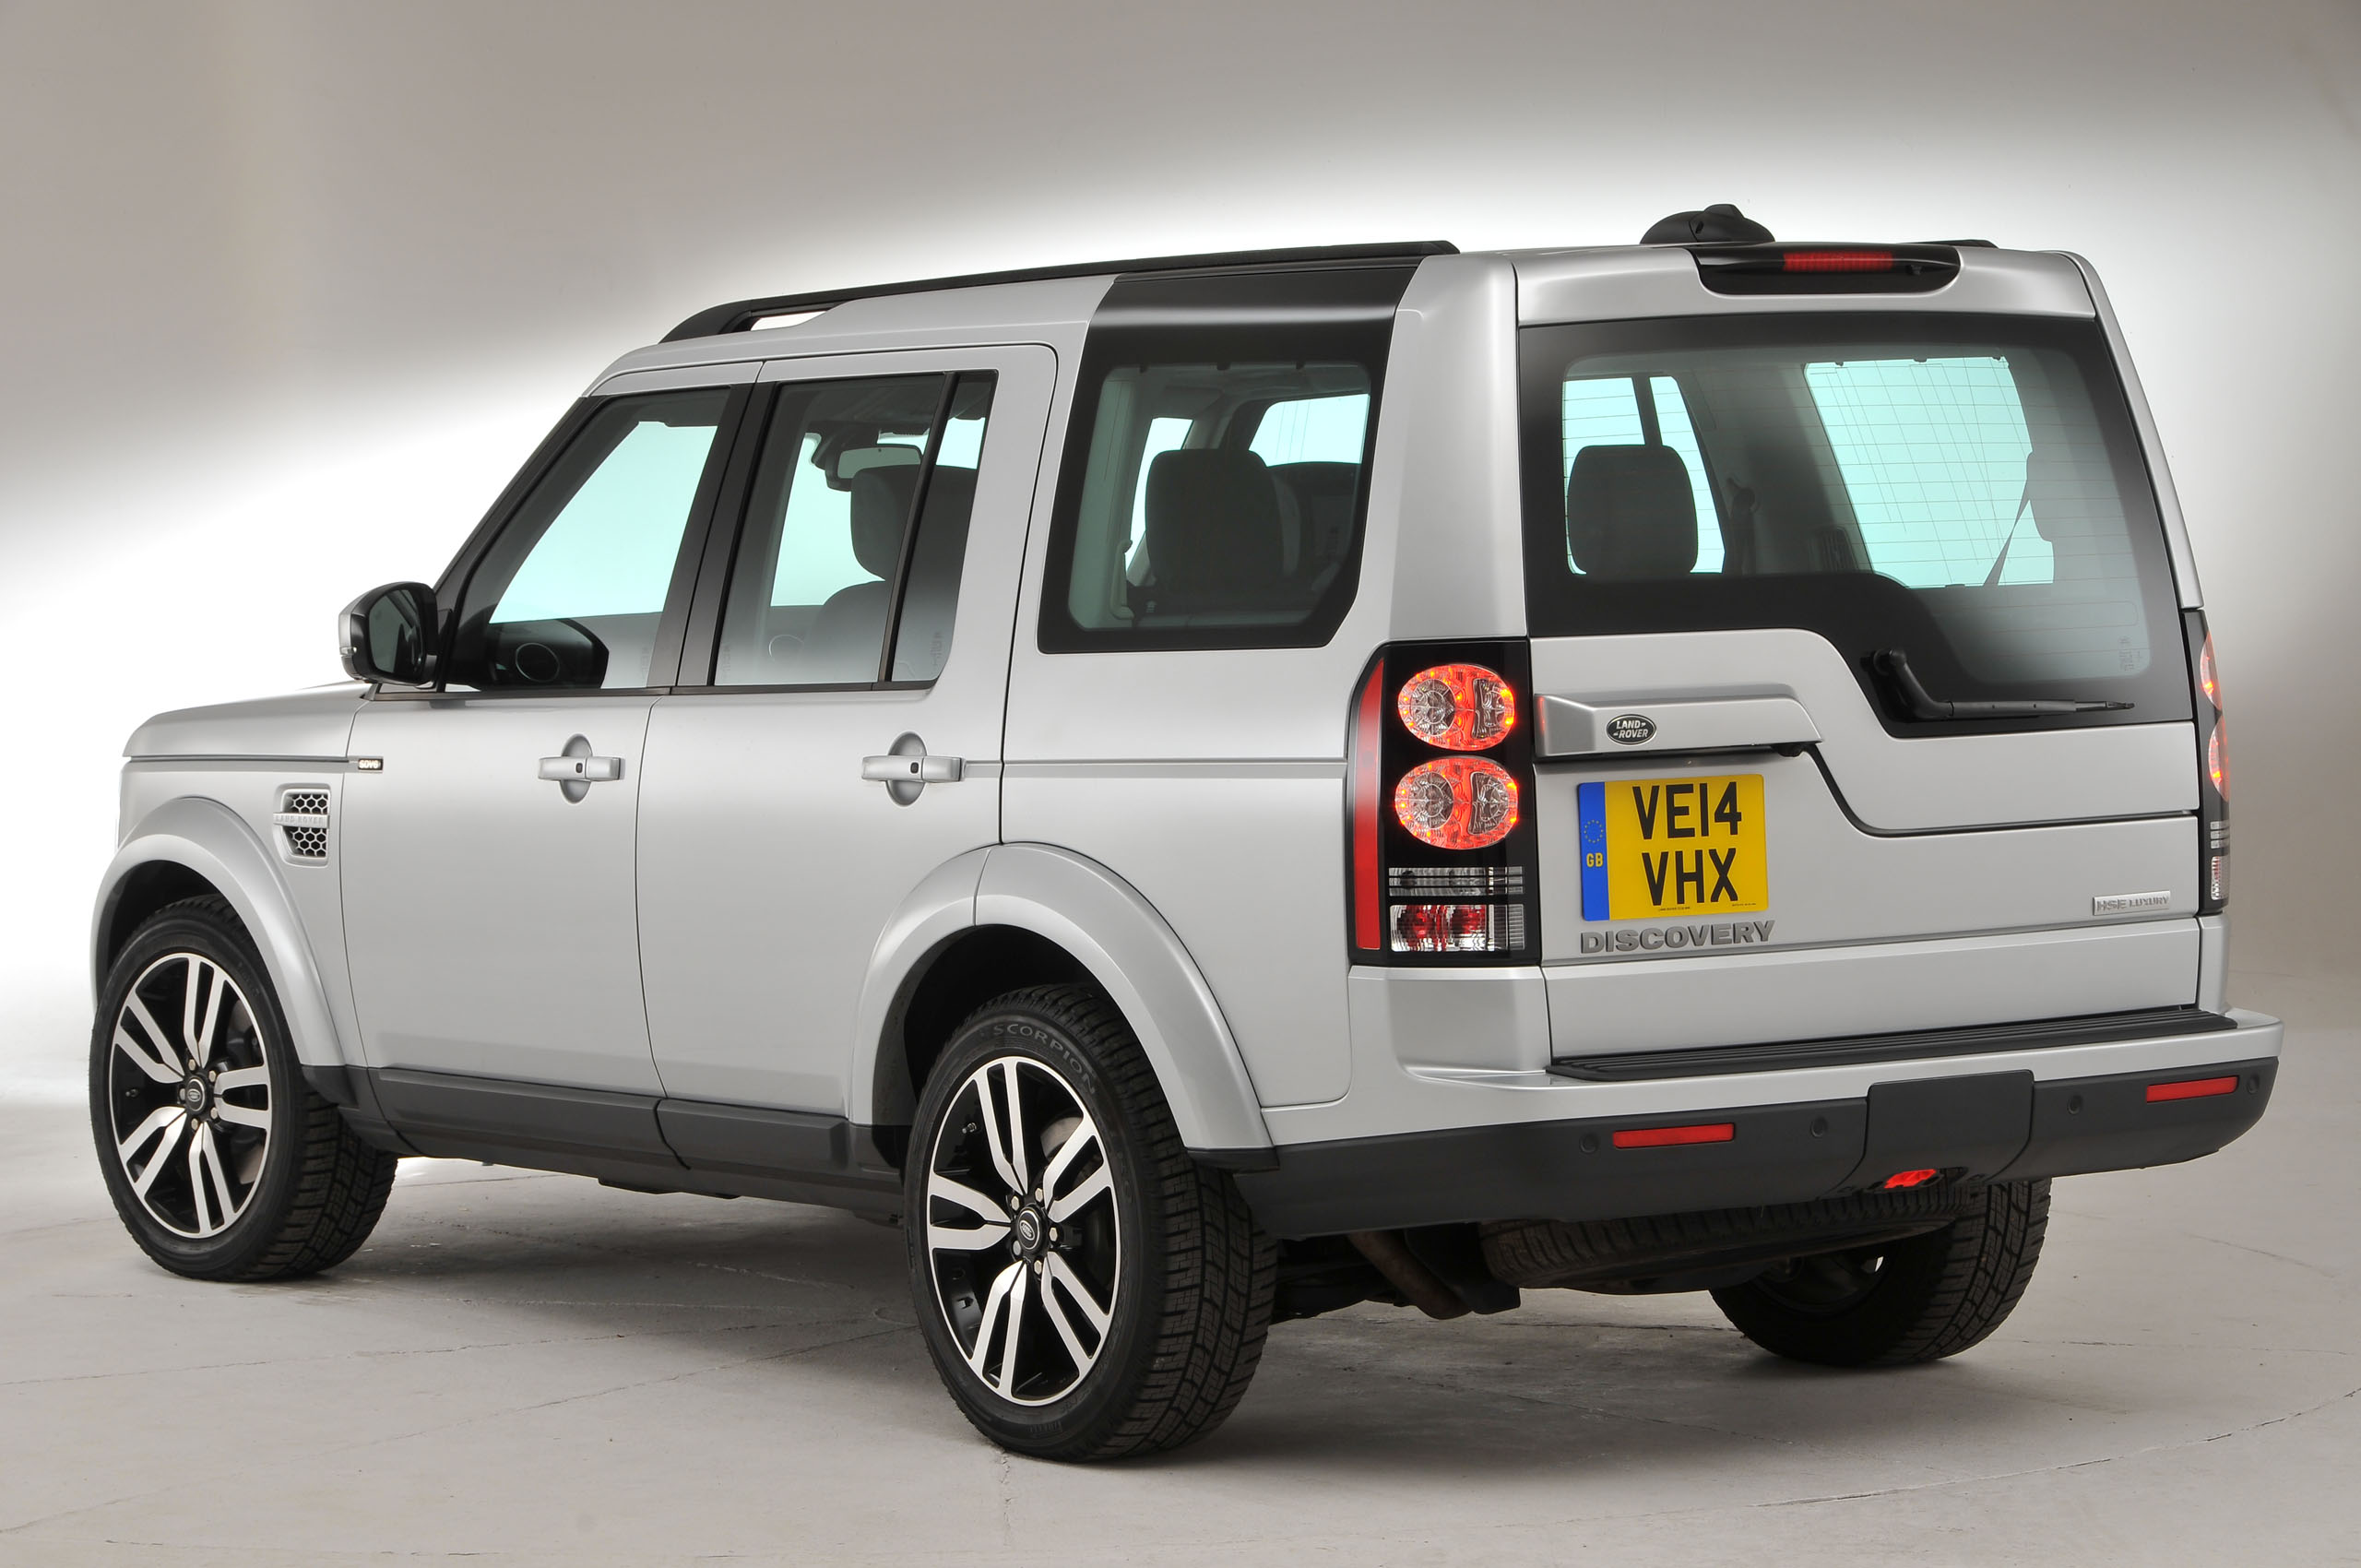 News - 2014 Land Rover Discovery Major Updates